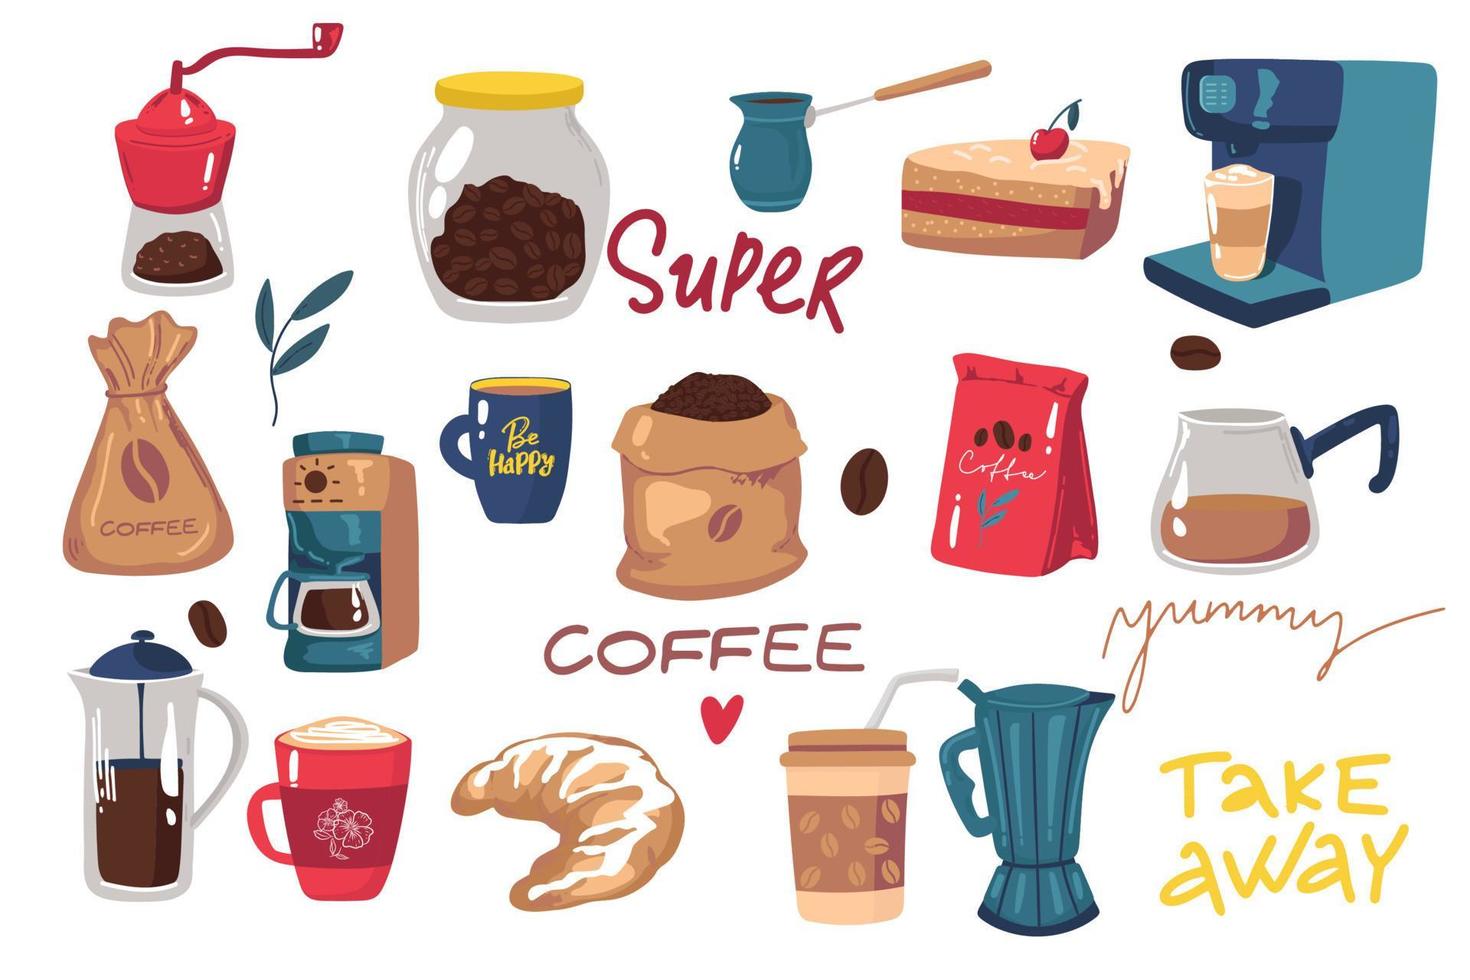 Big set of icons in flat style. Stylish coffee set of icons. Coffee, coffee drinks, coffee pots, and other devices and desserts. cup of coffee, croissant, cake, coffee machine, cezve, pack of coffee vector